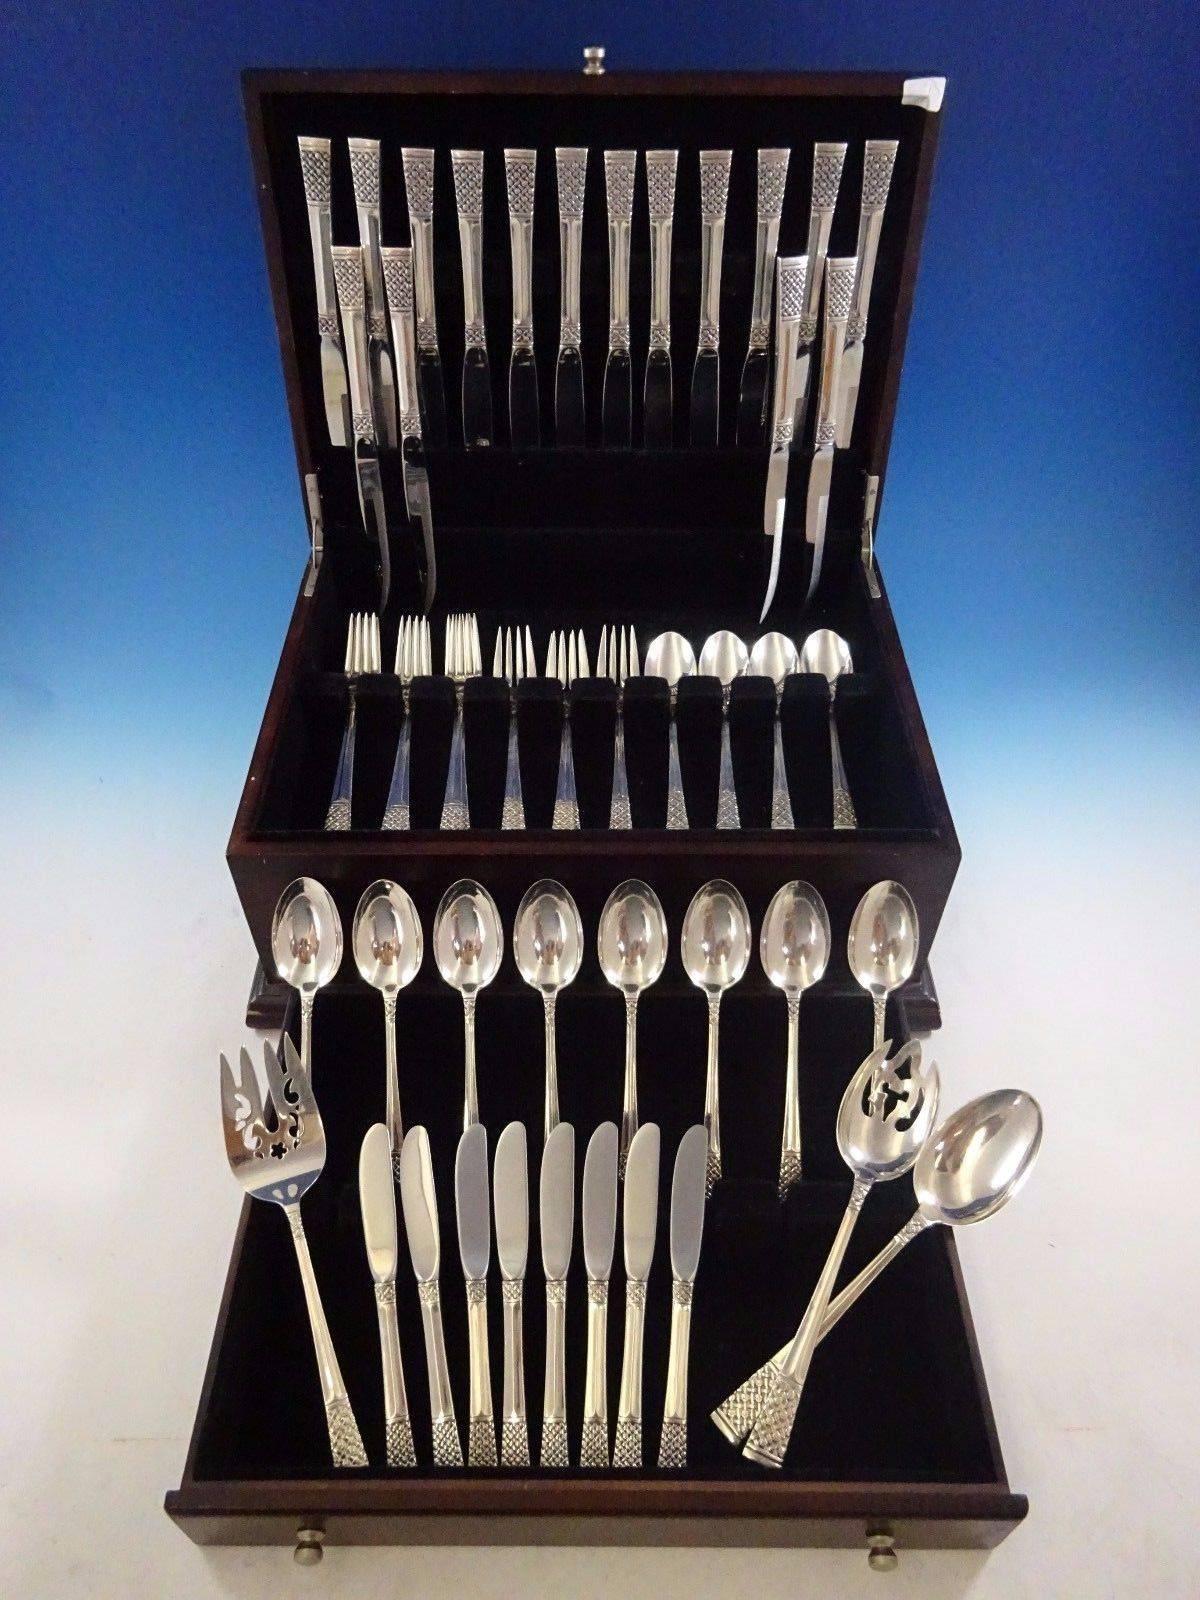 Columbine by Lunt sterling silver flatware set, 59 pieces. This scarce pattern features a unique woven, basket weave style design with floral detailing. This set includes:

Eight knives, 9